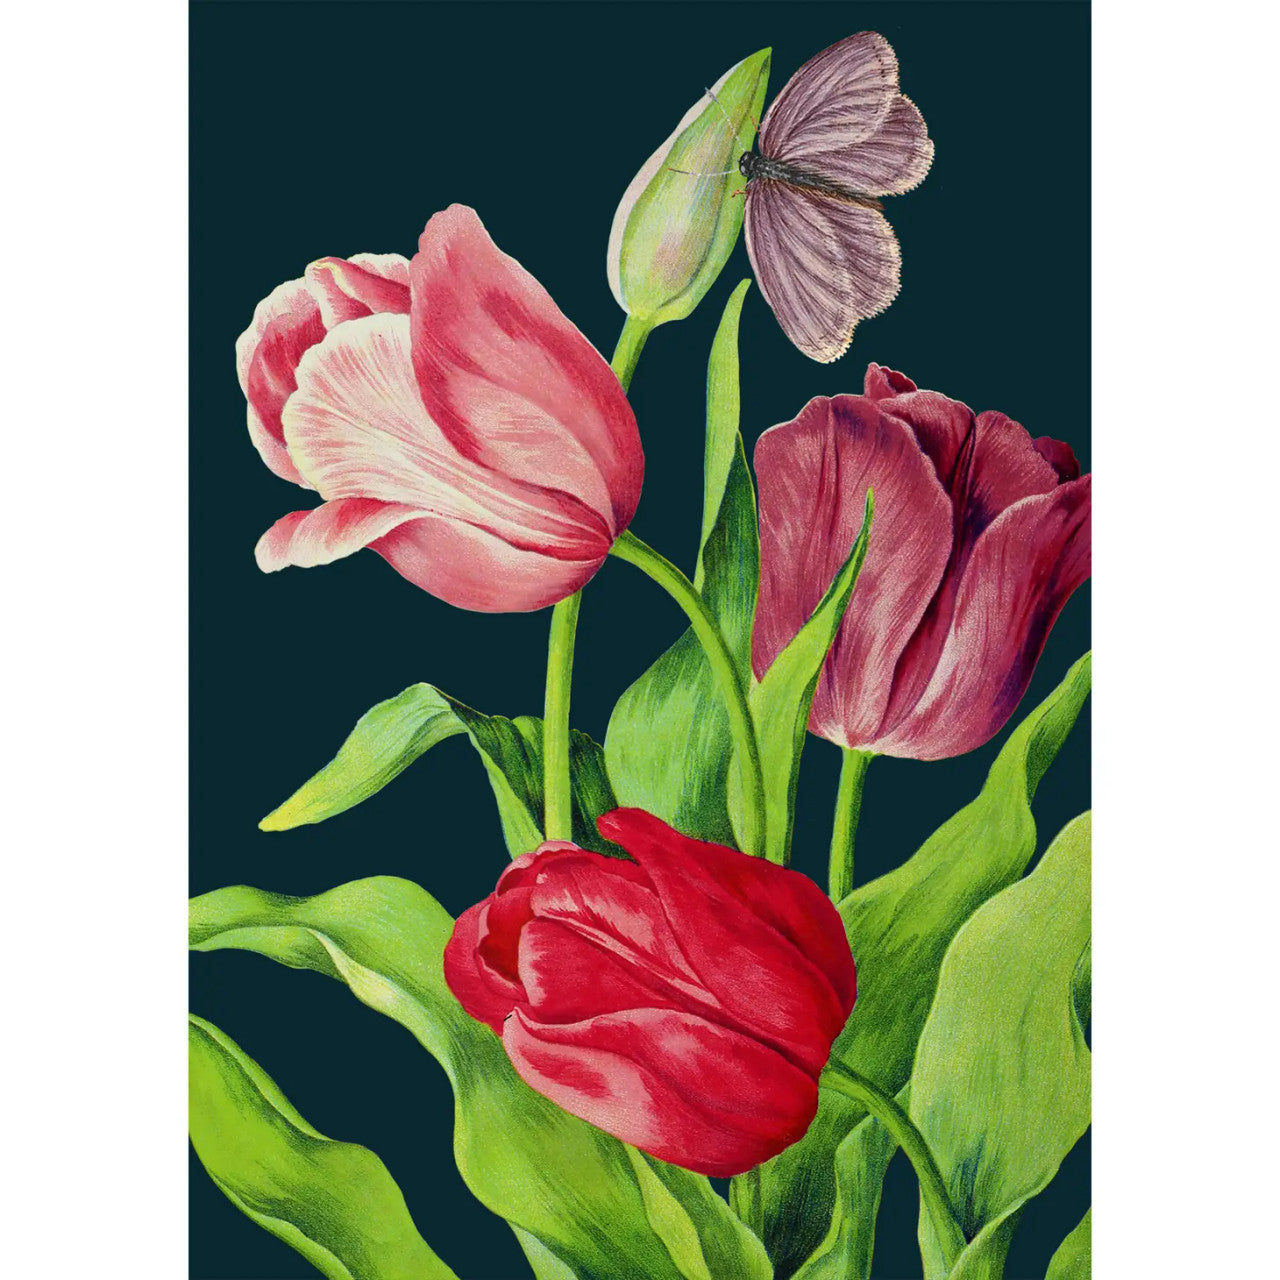 Midnight Tulips Card by Madame Treacle.